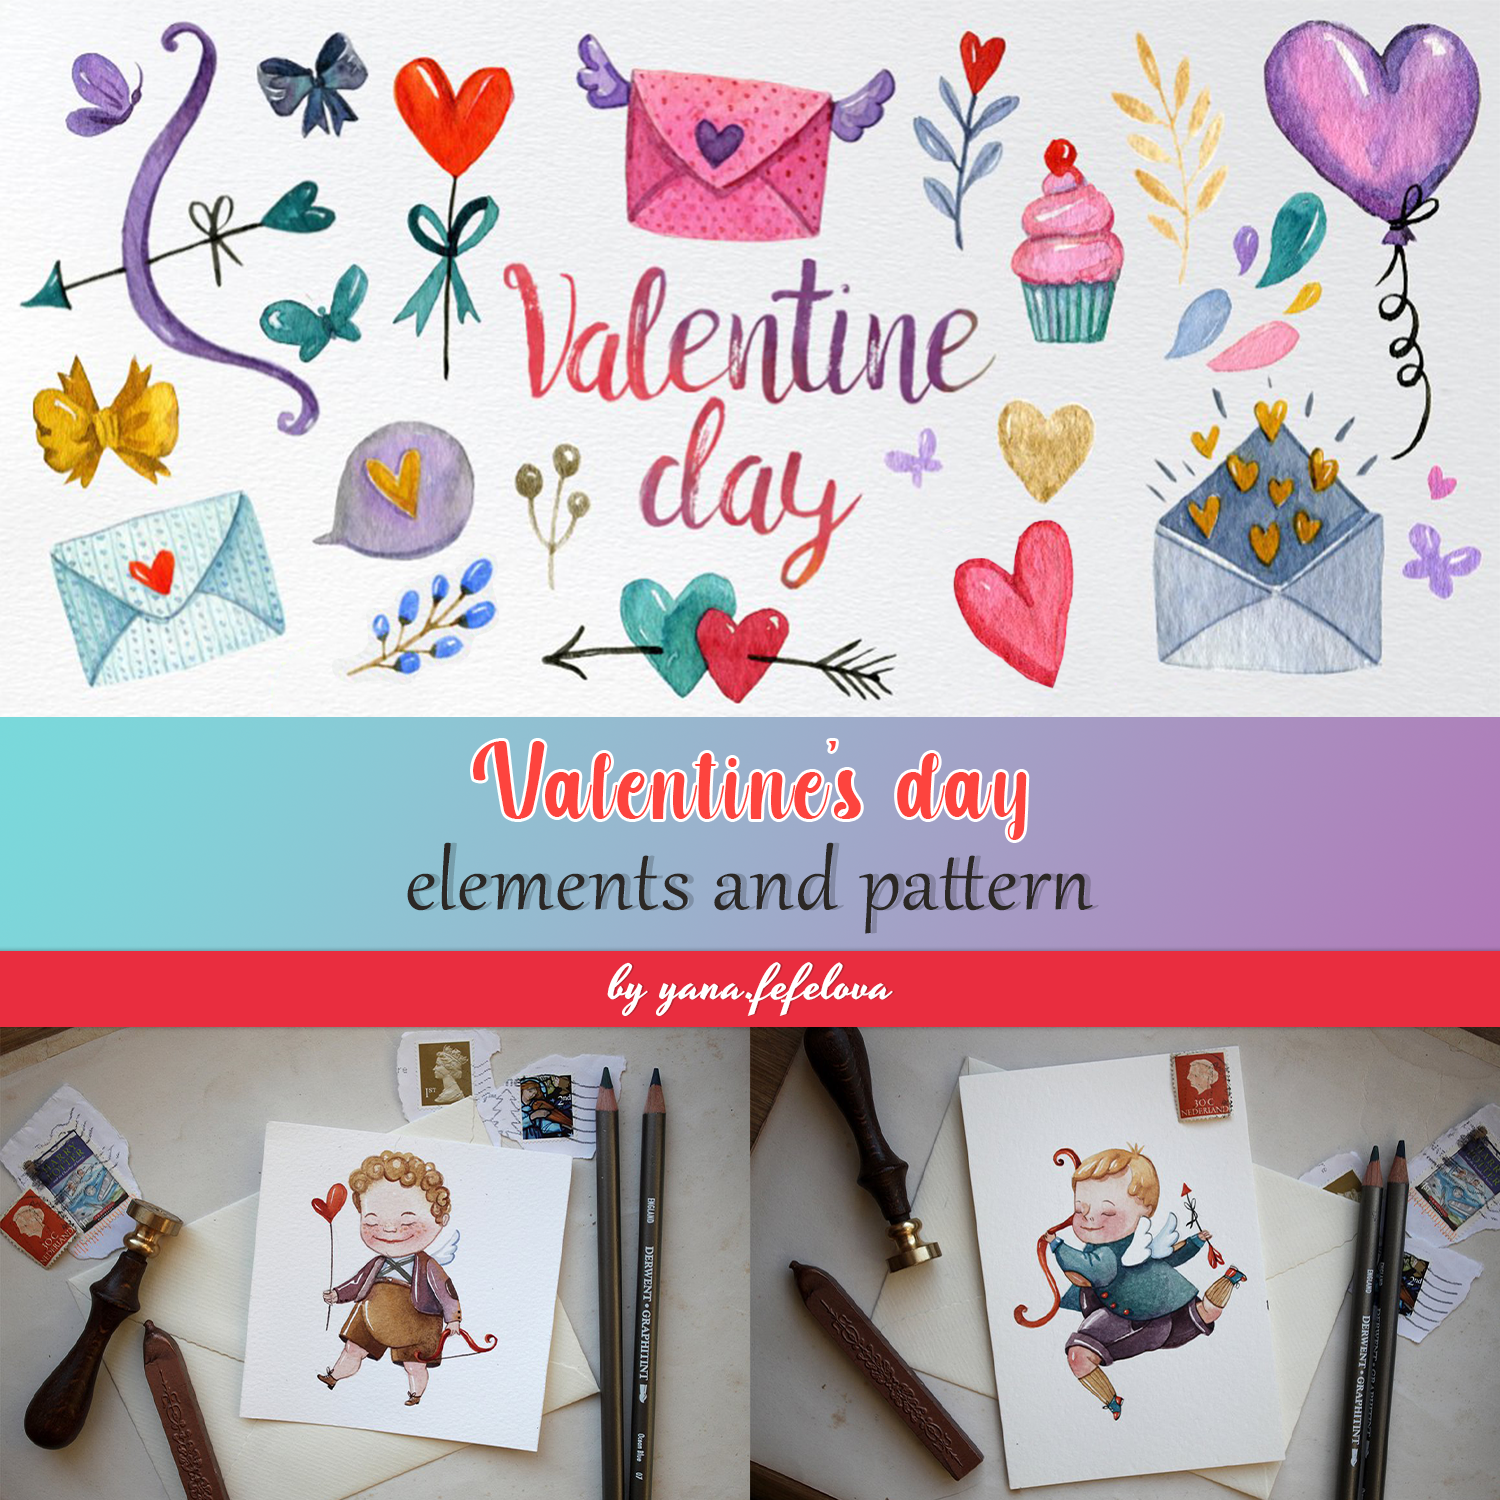 Illustration valentines day elements and pattern.